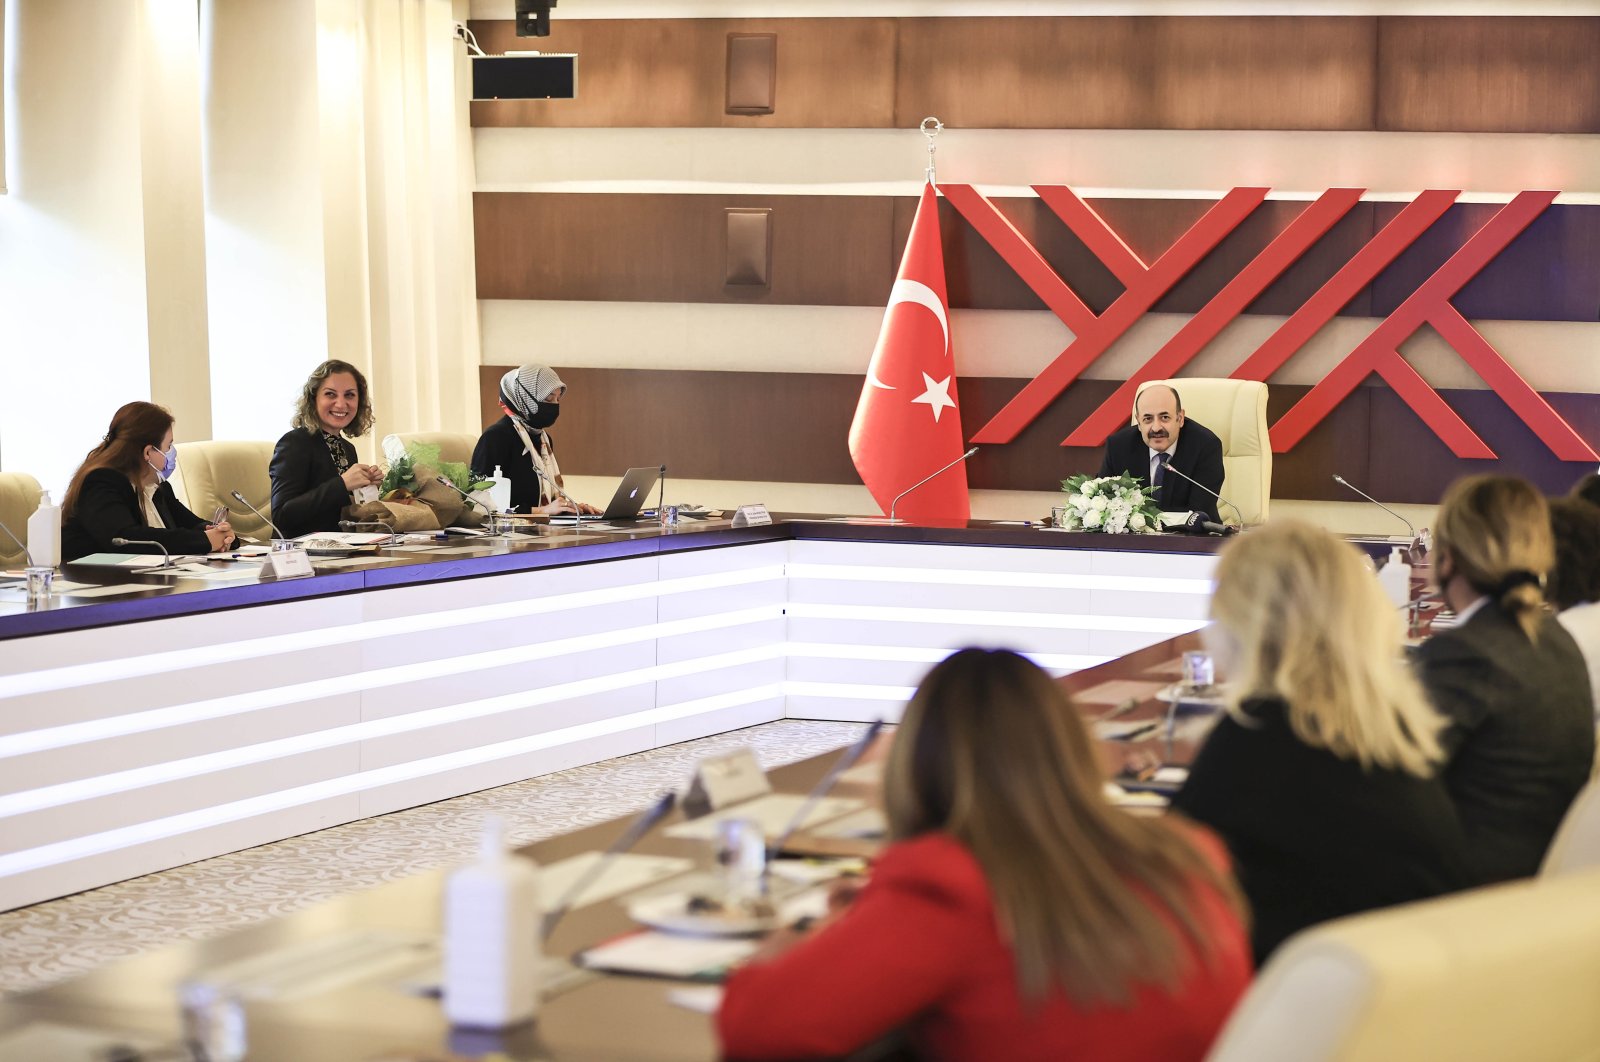 Female rectors attend a meeting with the Council of Higher Education (YÖK) president, Yekta Saraç, in the capital Ankara, Turkey, June 9, 2021. (AA PHOTO)